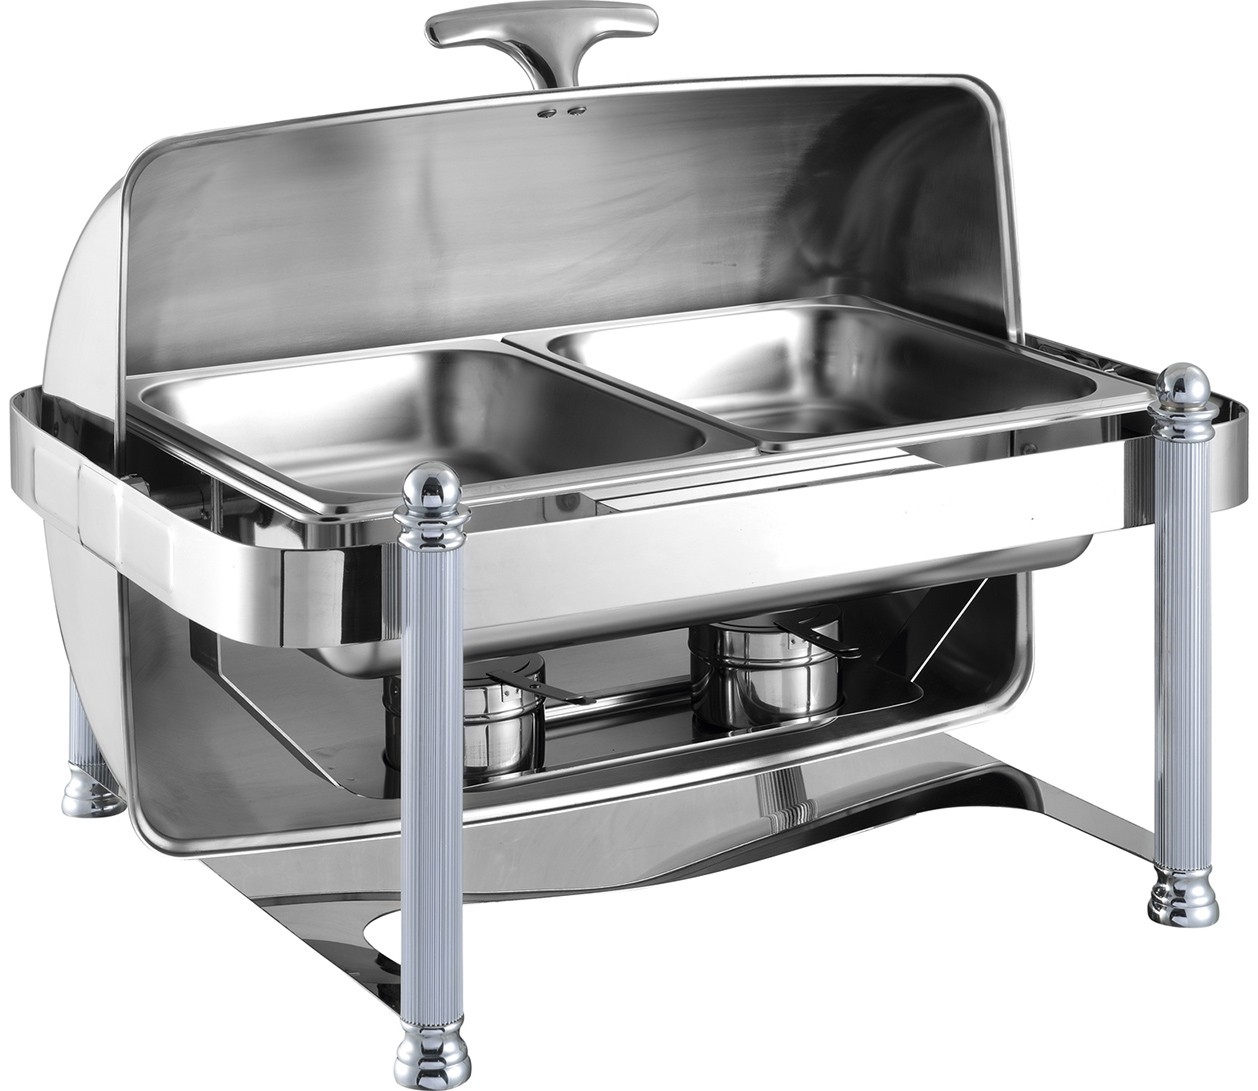 GRT-6501 Stainless Steel Rectangular Chafing Dish 9L